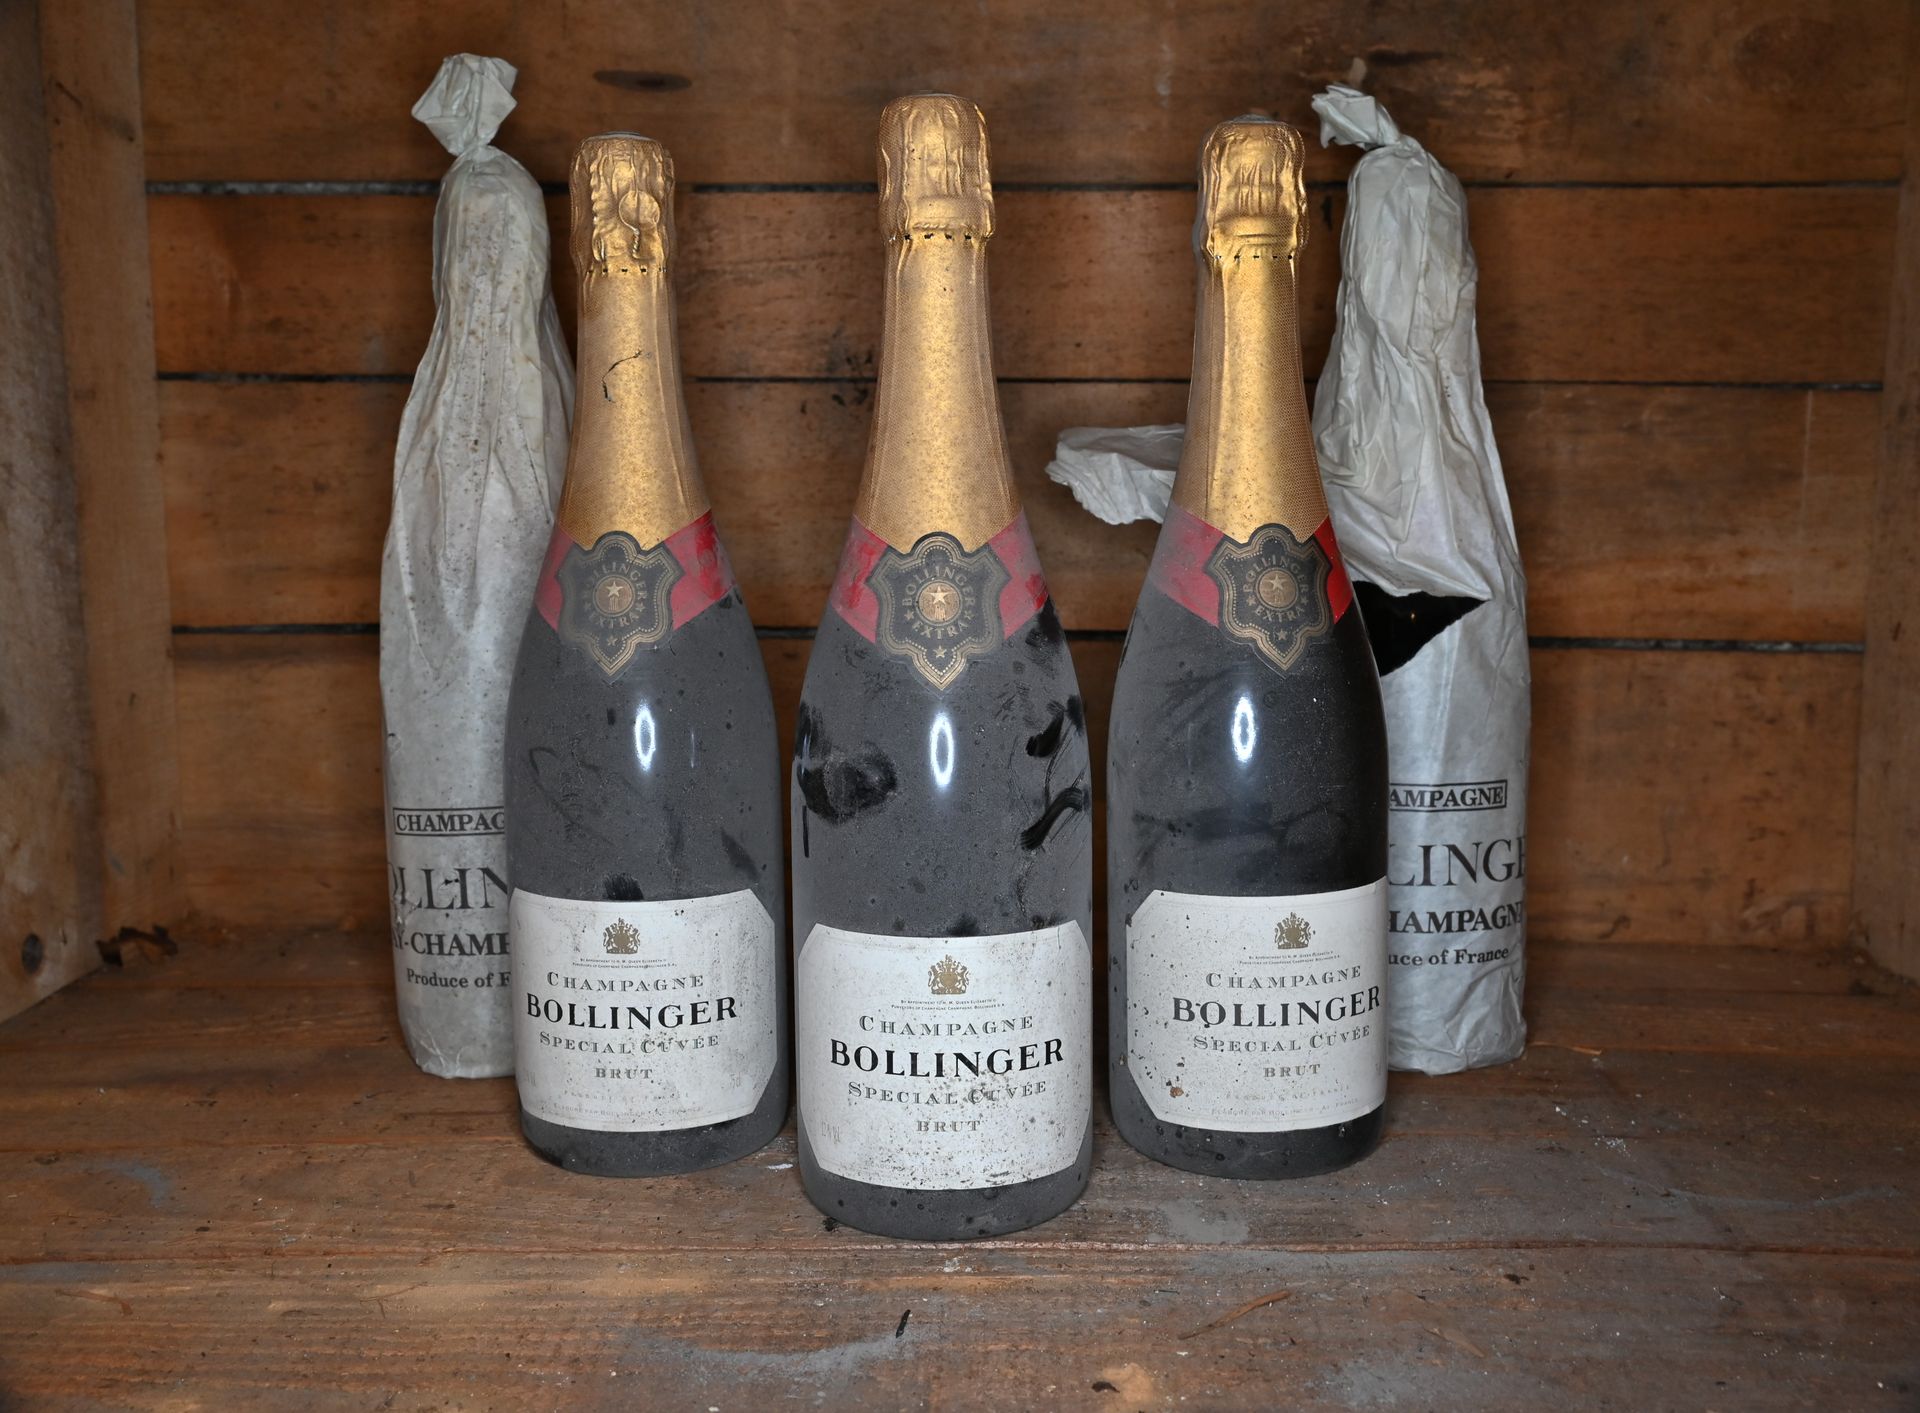 Null 6 bottles of Champagne Bollinger Spécial Cuvée Brut. 

The condition of the&hellip;